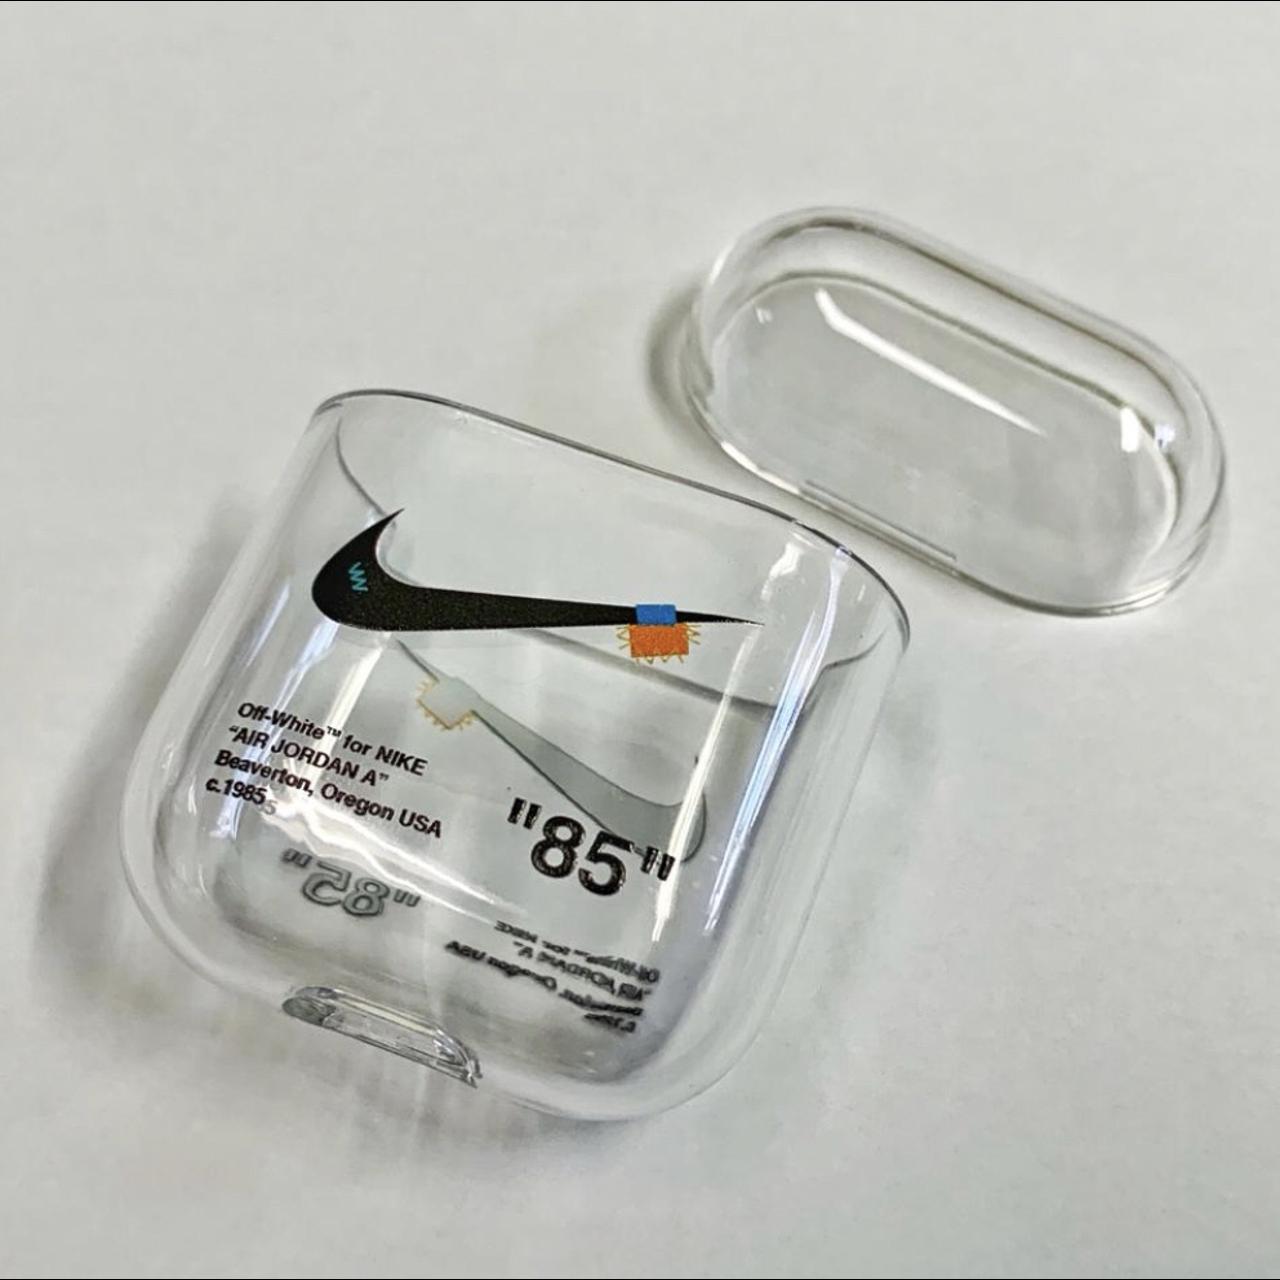 Black, Apple Airpods Pro) Off White Nike Airpods Case Airpods 1